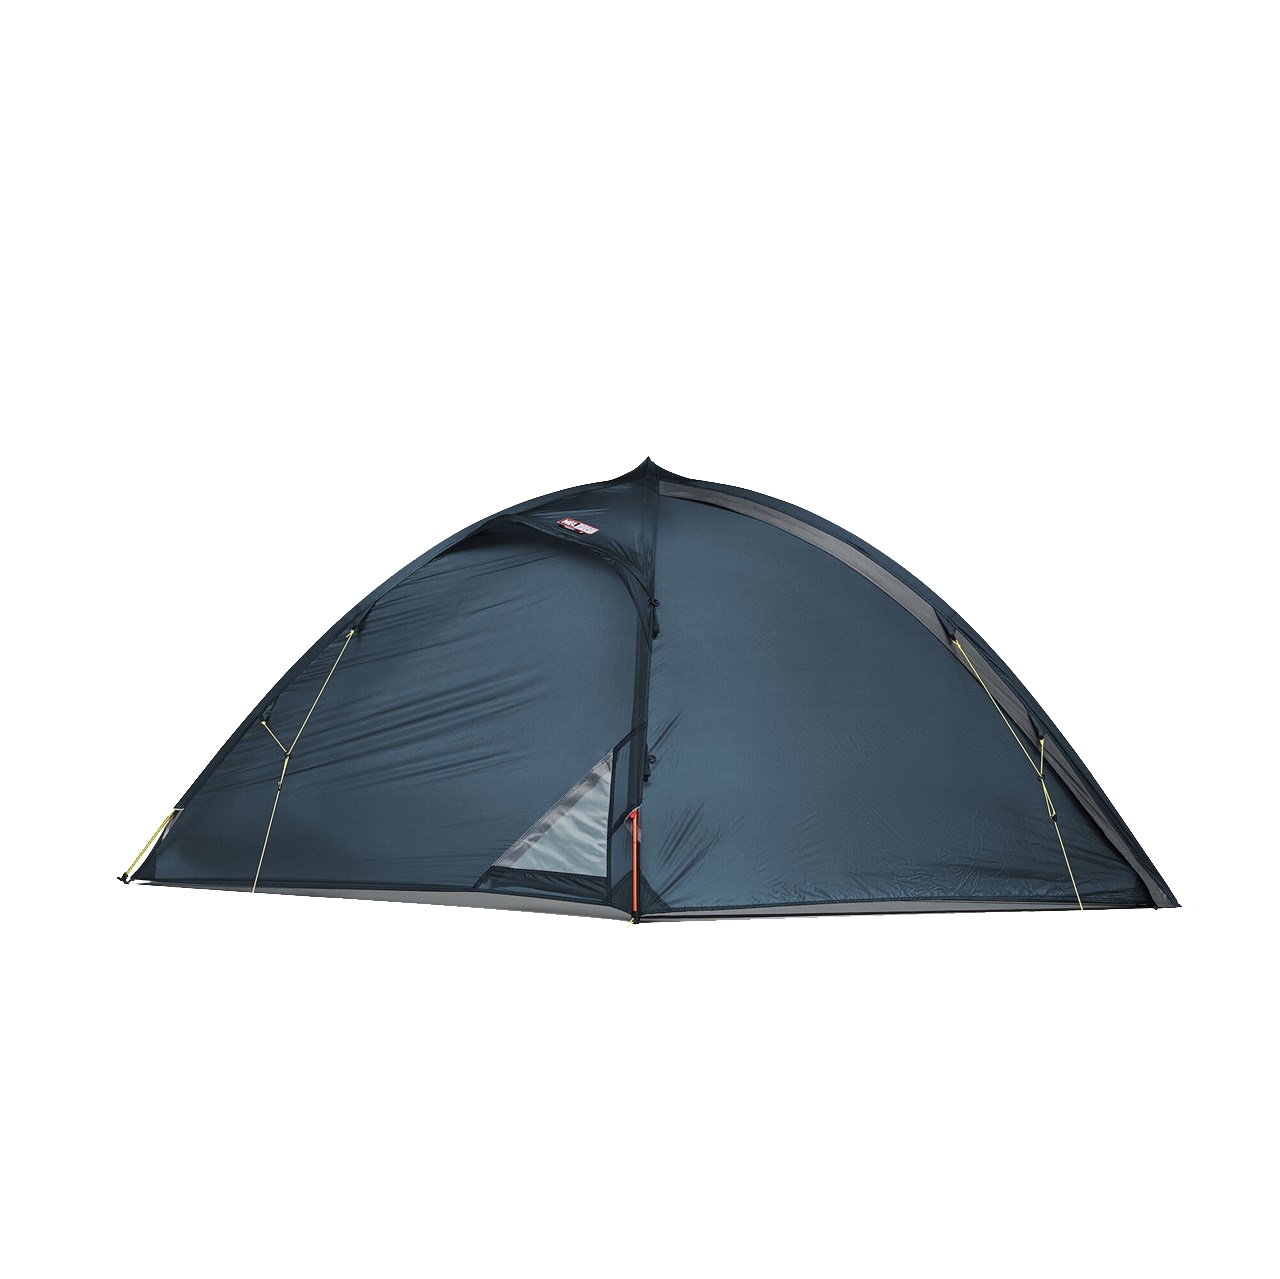 Picture of Helsport Reinsfjell Superlight 3 Tent - blue